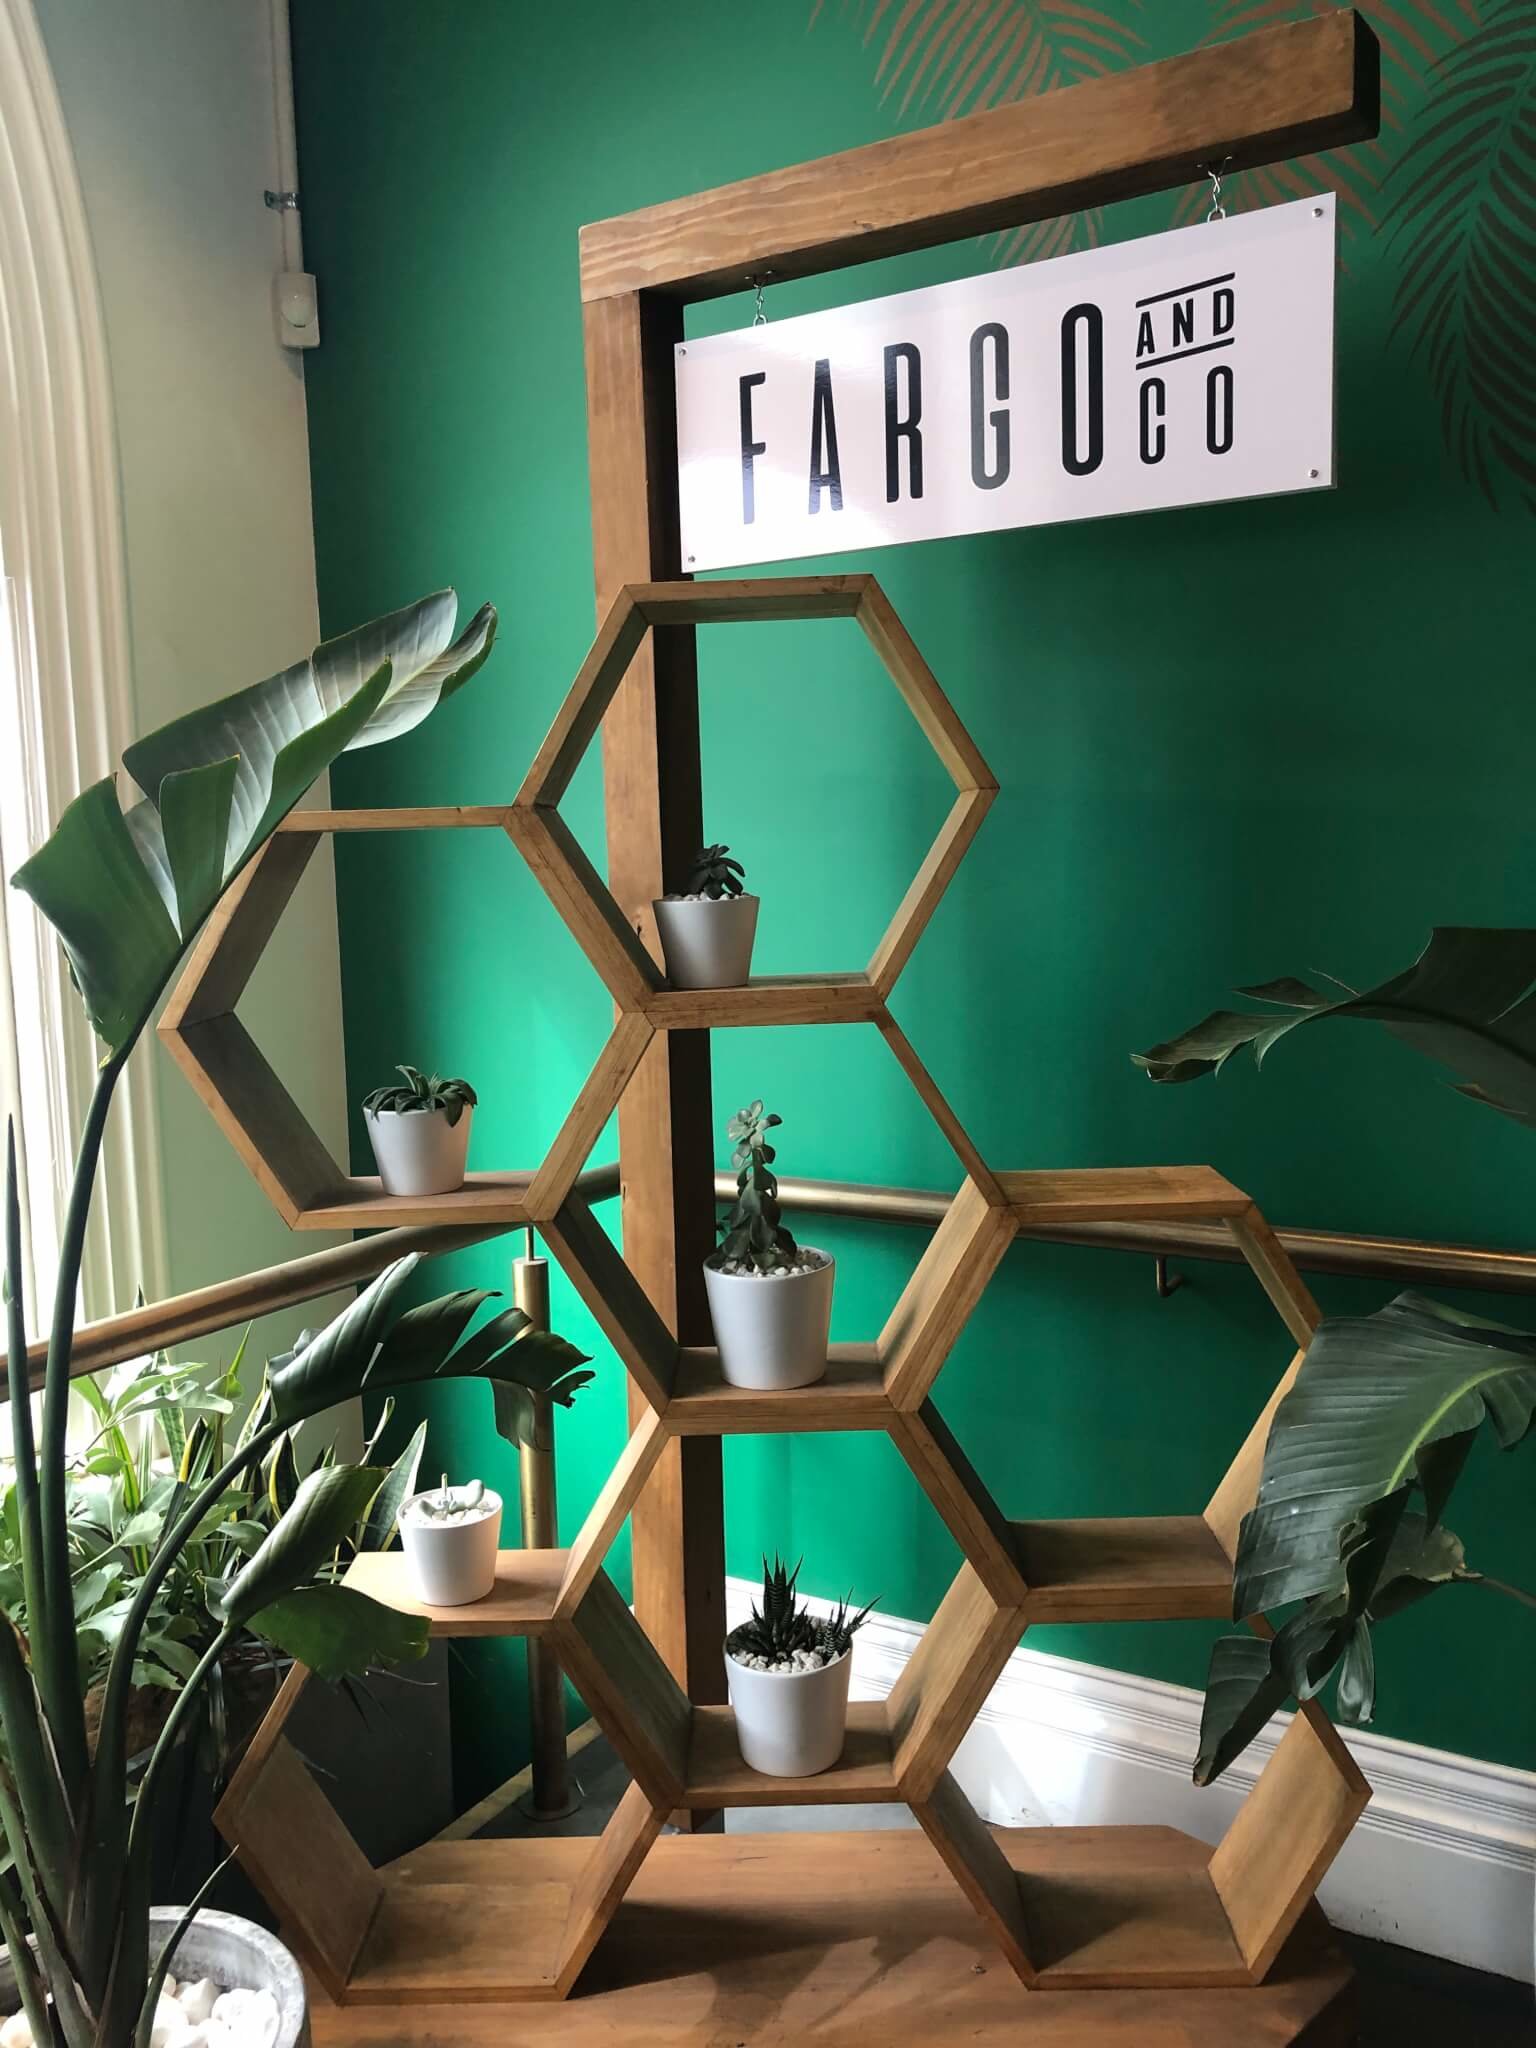 Fargo and Co Brunch Sign